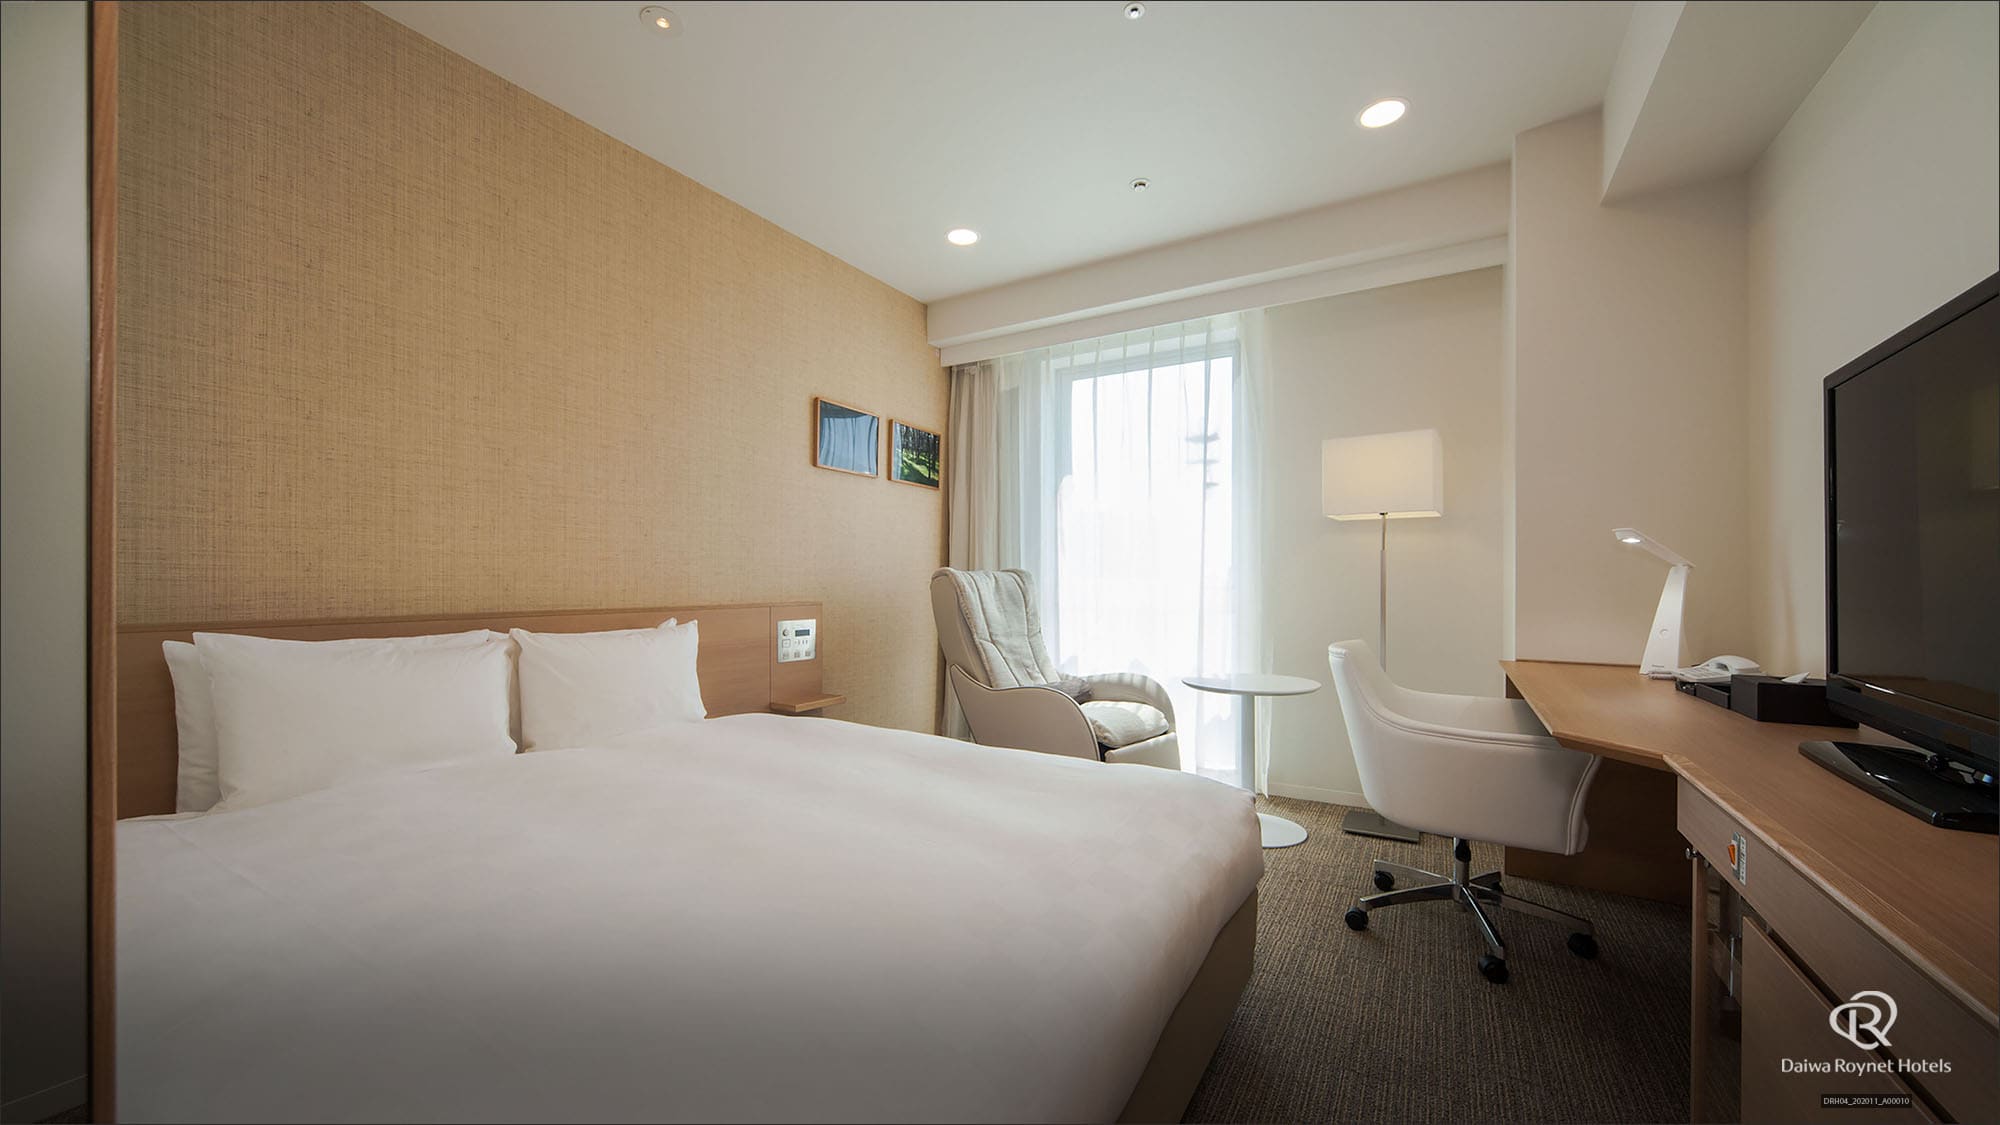 Deluxe double room Room area: 26㎡ Bed size 168cm